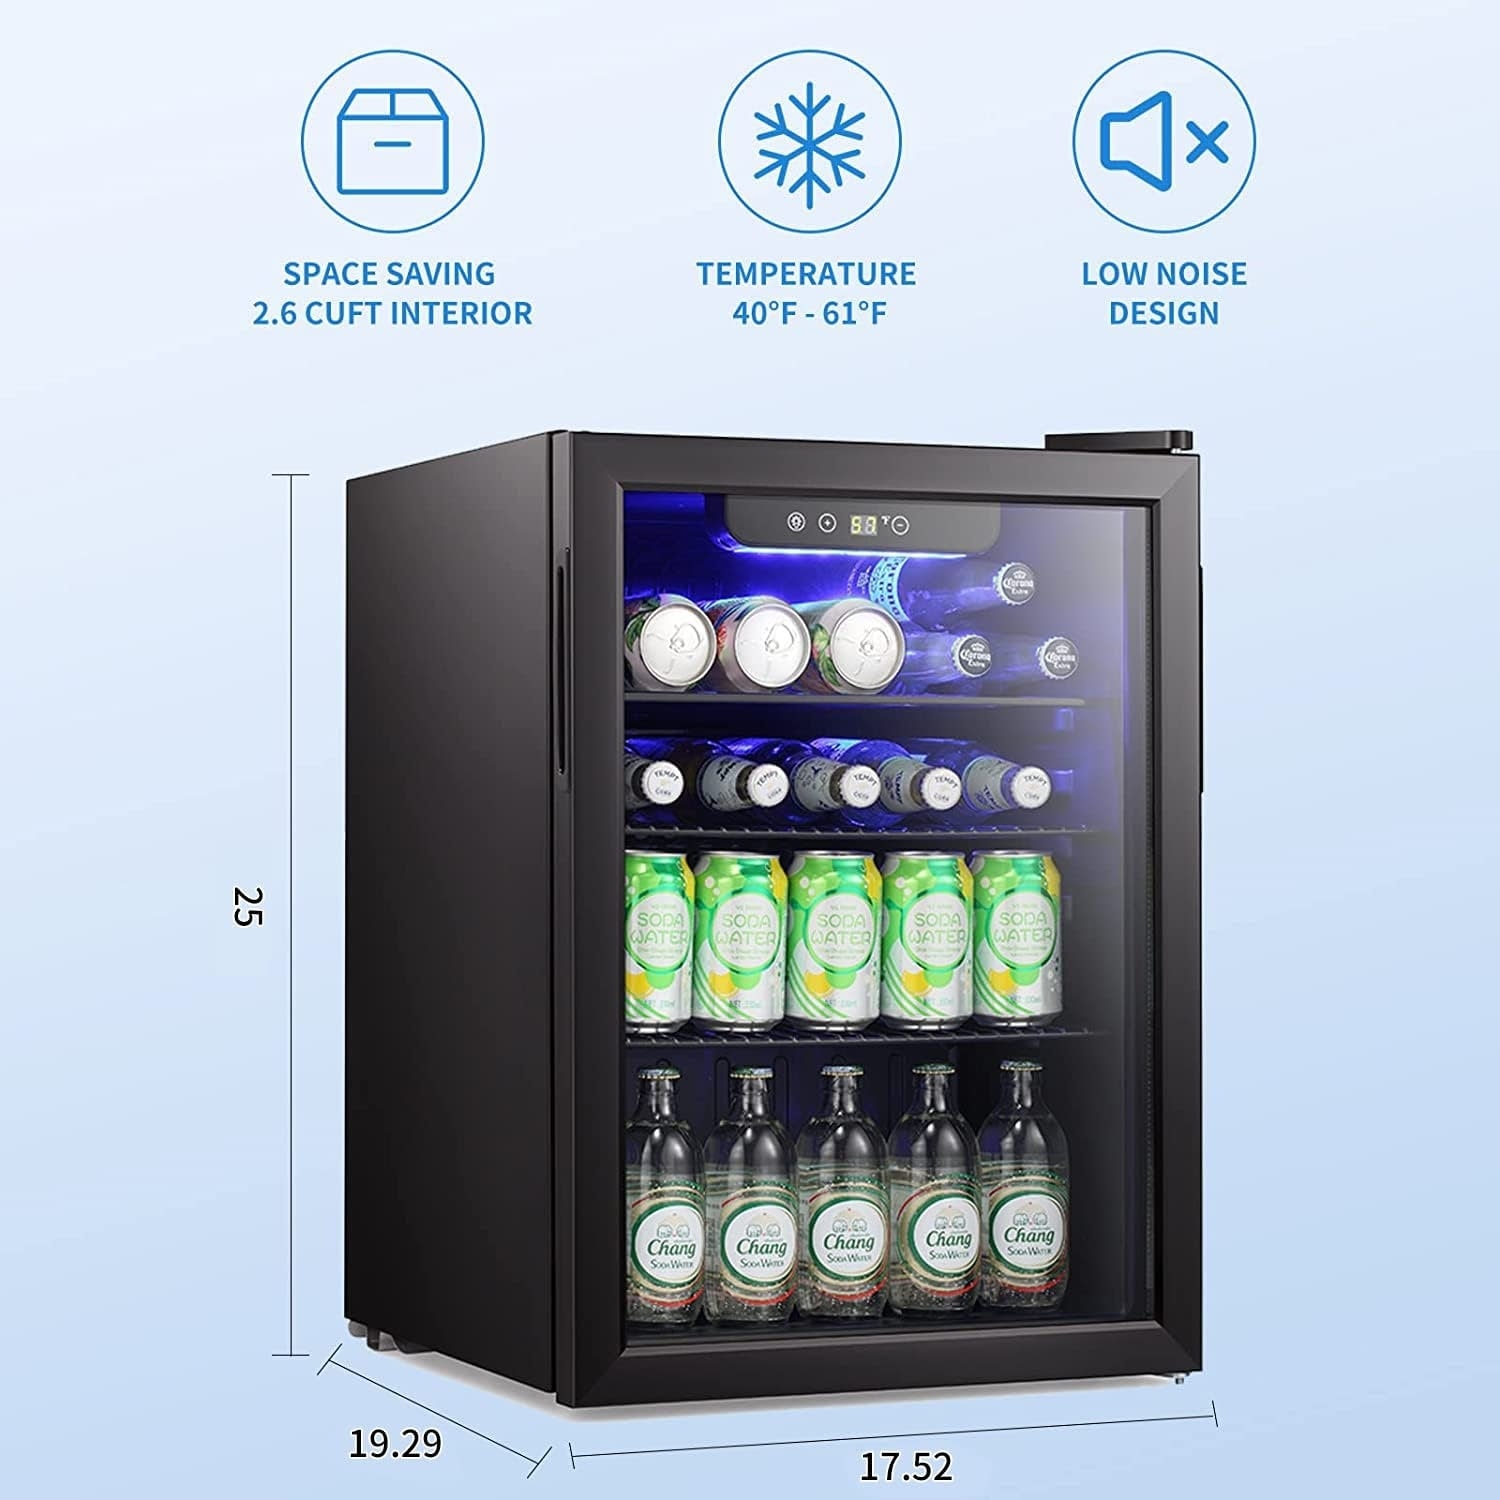 https://ak1.ostkcdn.com/images/products/is/images/direct/09f36e95f07e71210100b0c05c8668aea8dd49a6/Mini-Fridge-100-Can-Beverage-Refrigerator-Wine-Cooler-Clear-Front-Glass-Door-Small-Drink-Touch-Screen.jpg